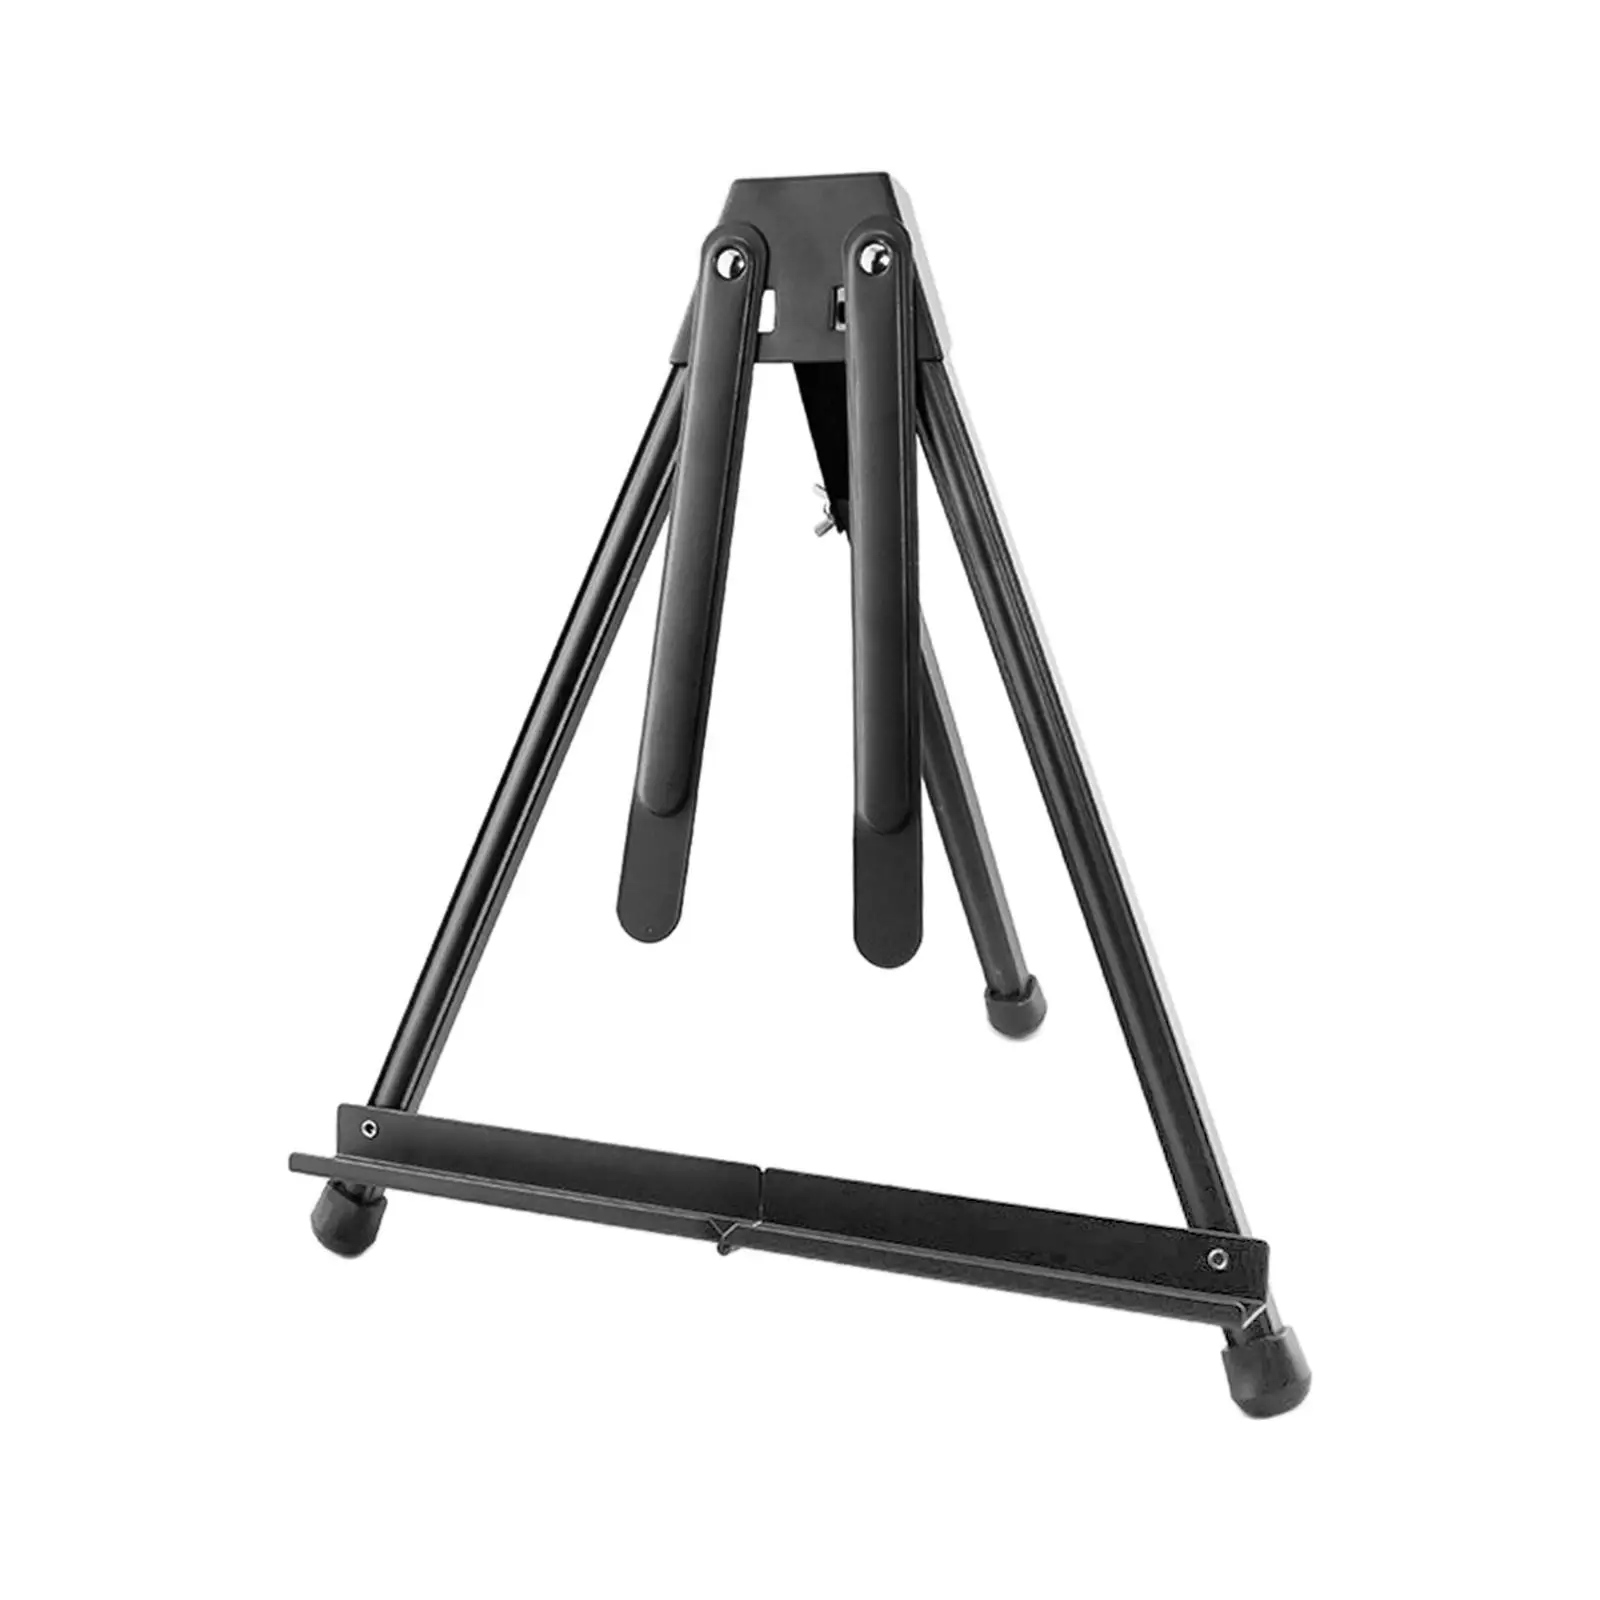 Tabletop Easel Stand with Bag Collapsible Easel Home Tripod Display Easel for Photo Frame Canvas Wedding Birthday Displaying Art